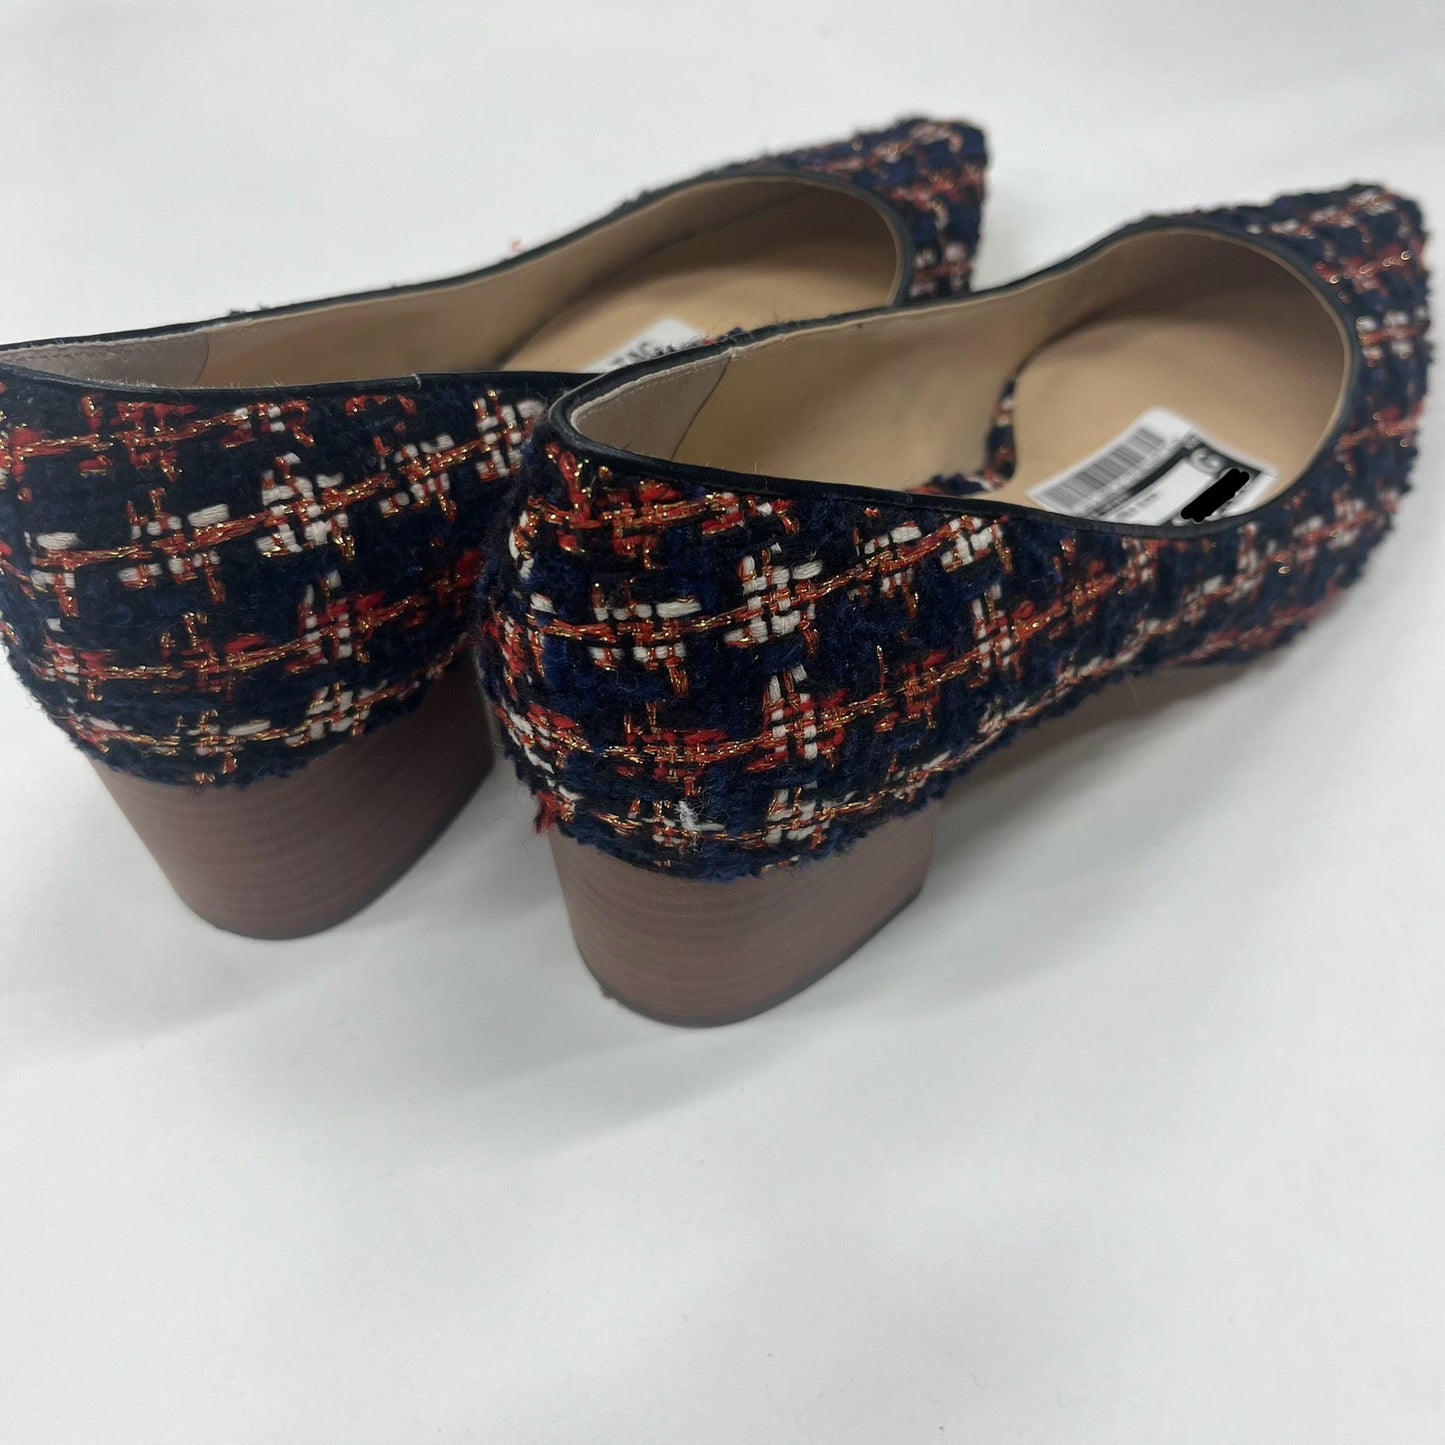 Tweed Shoes Heels Block Sole Society, Size 8